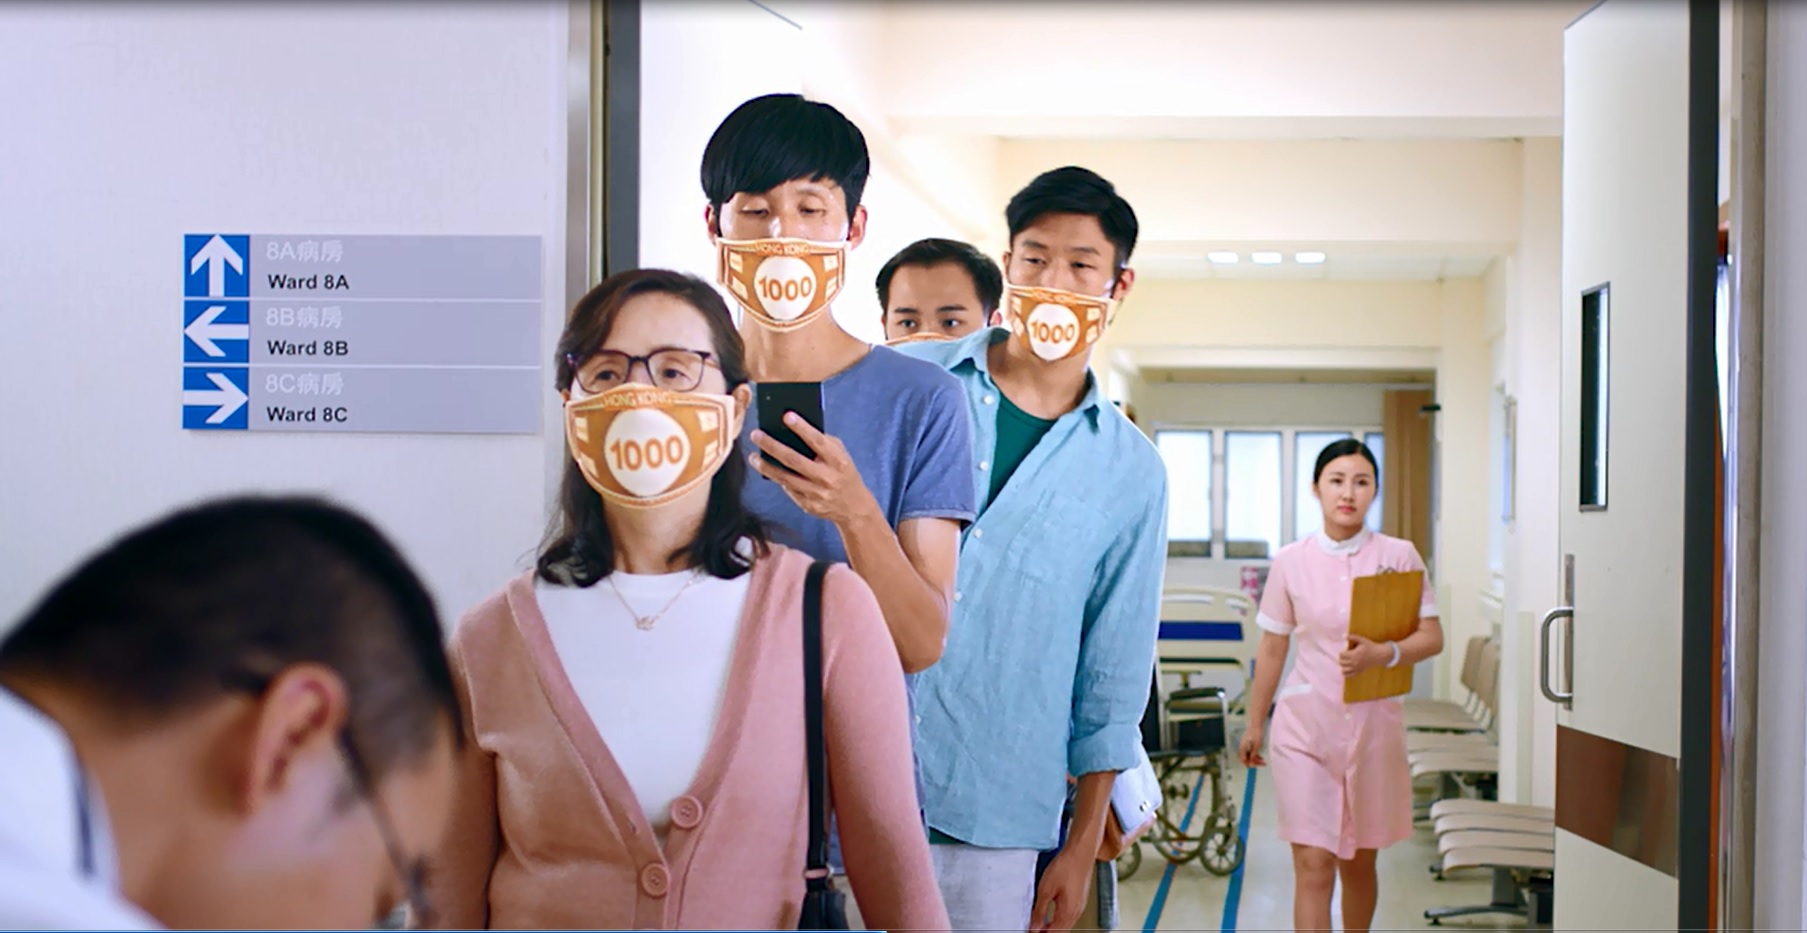 China Life (Overseas) launches “Change is constant. So is our promise.” New Television Ad Campaign